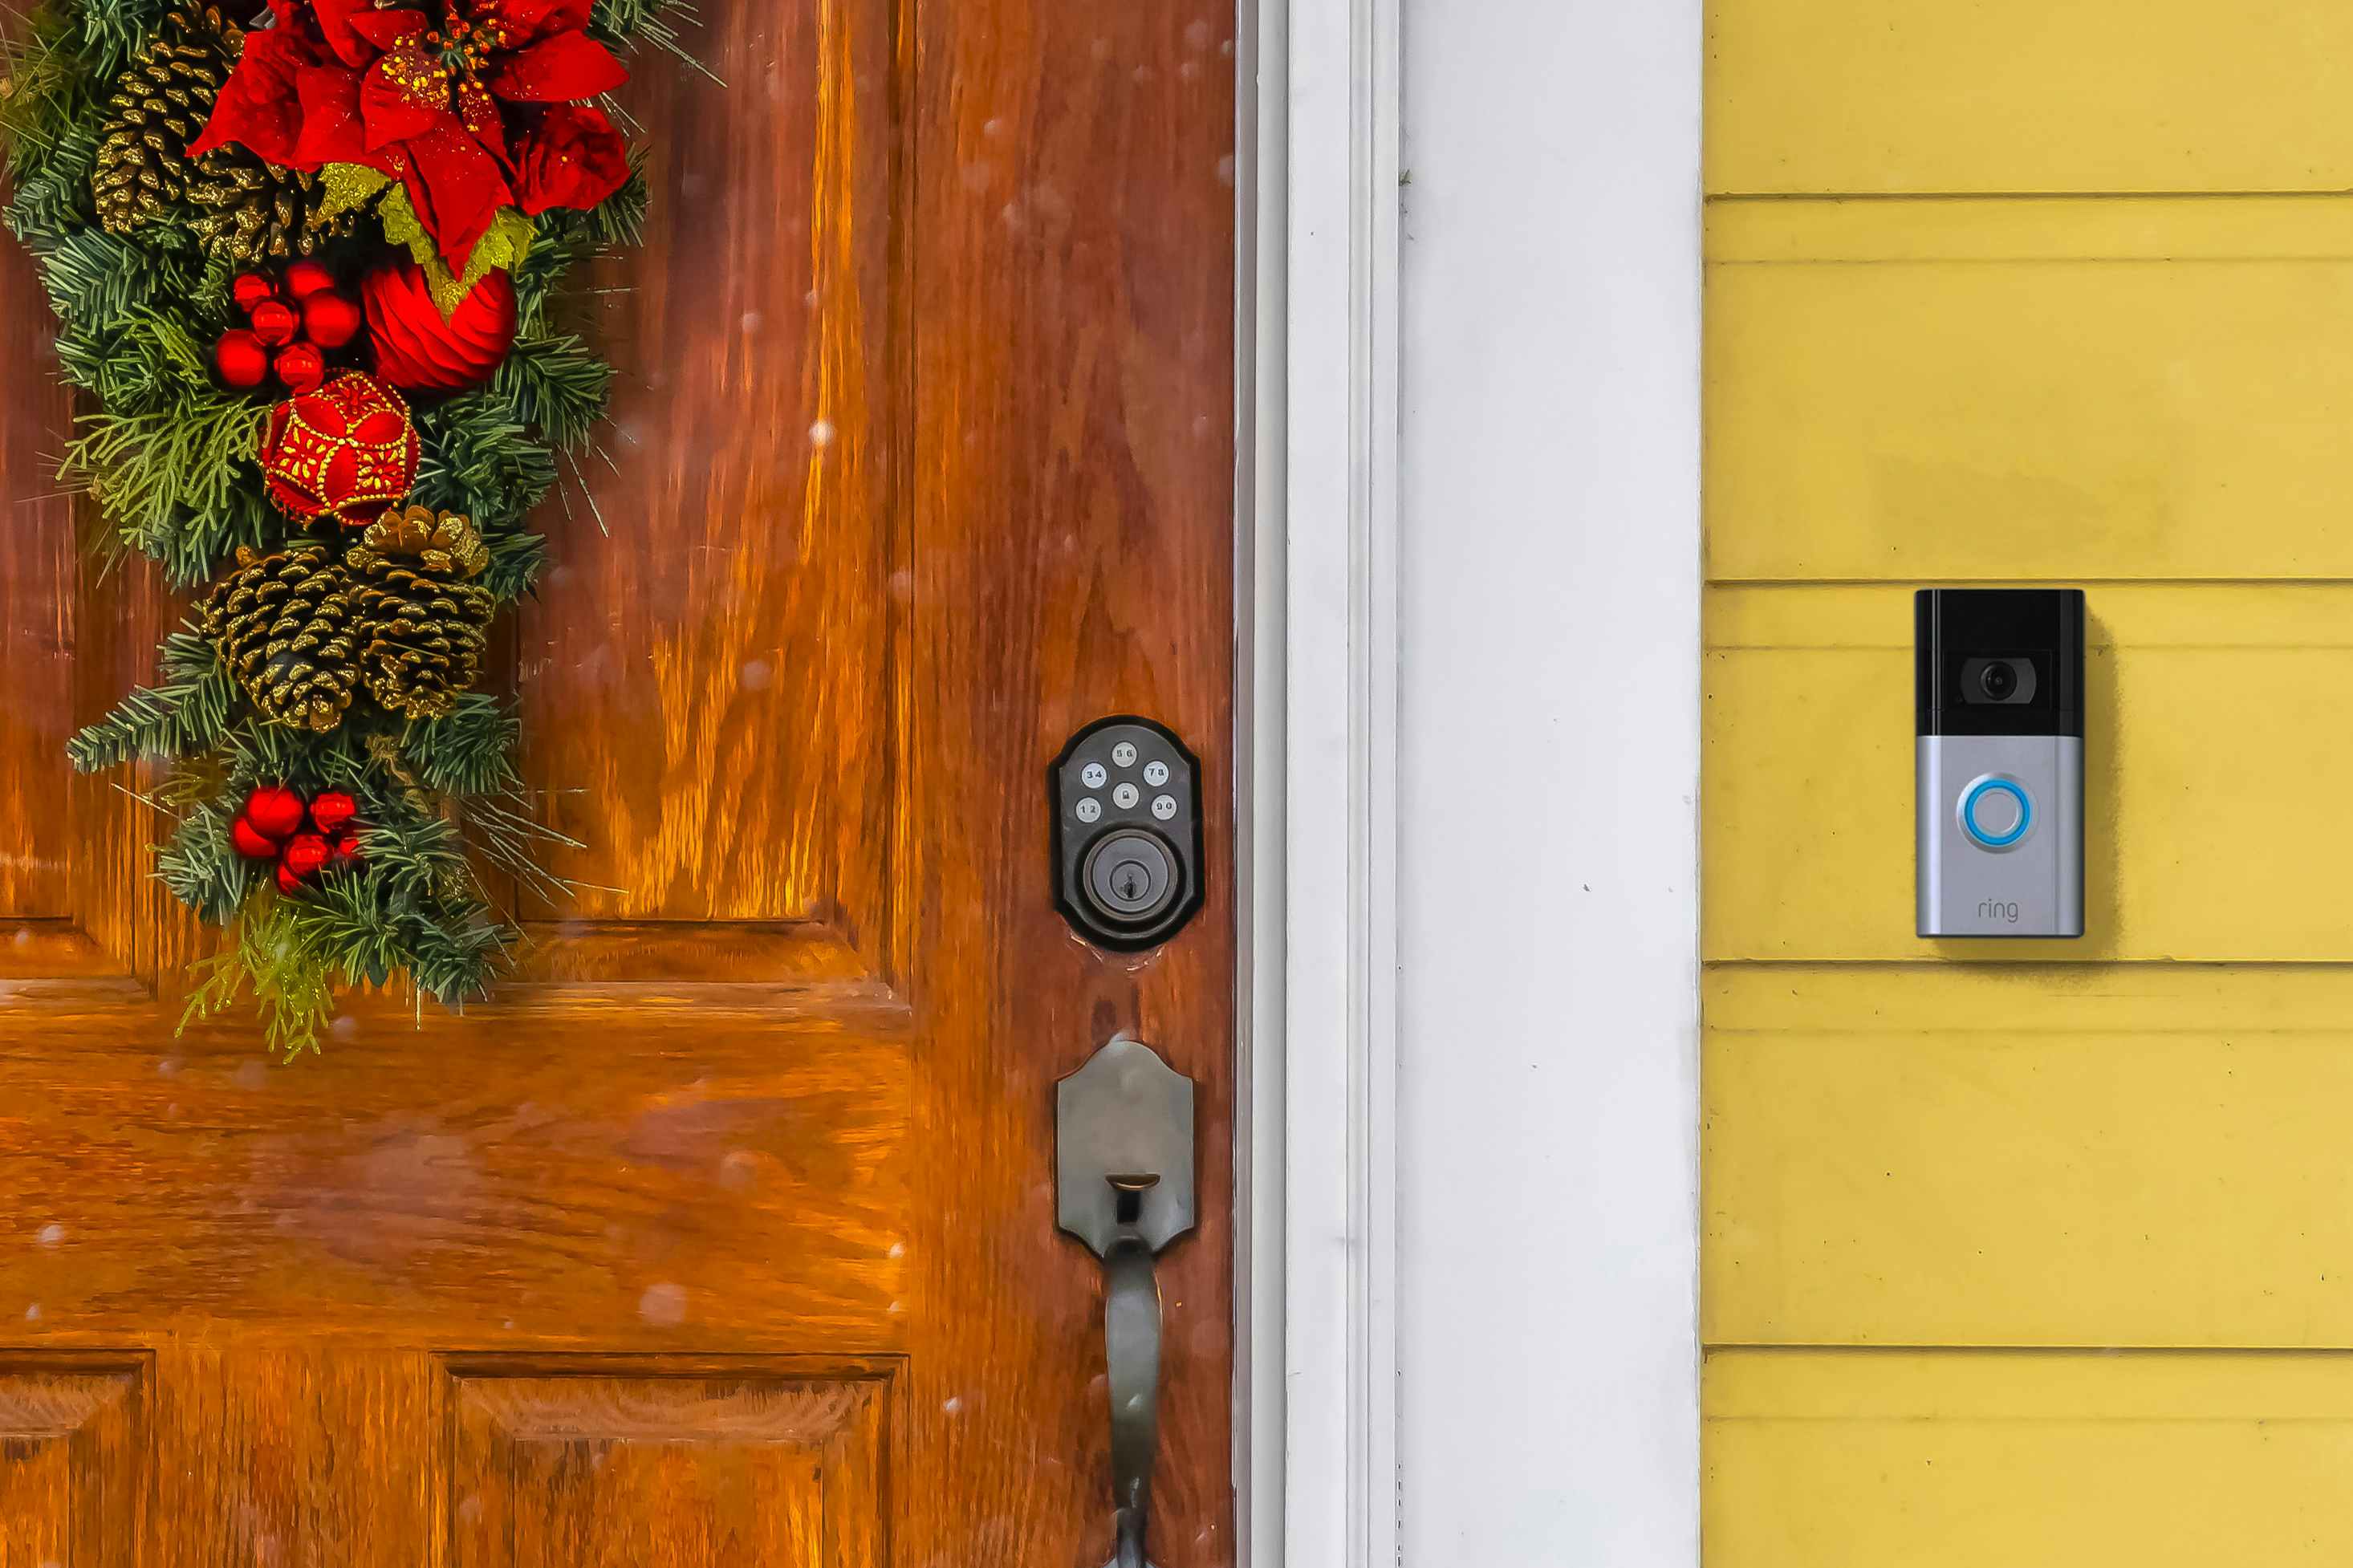 A Ring doorbell outside of a front door that is decorated for Christmas